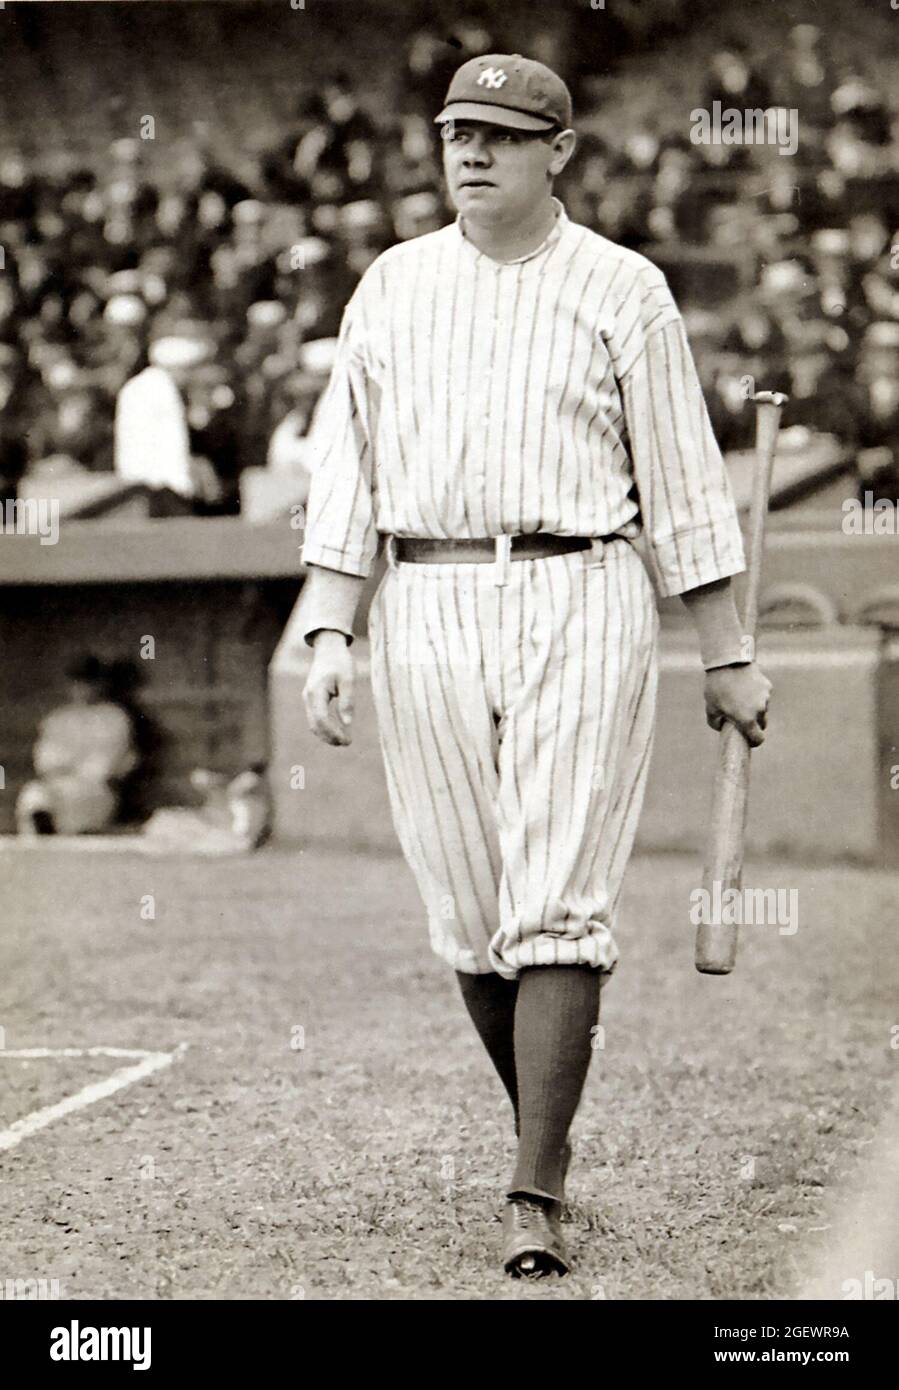 Early photo of Babe Ruth with the New York Yankees Stock Photo